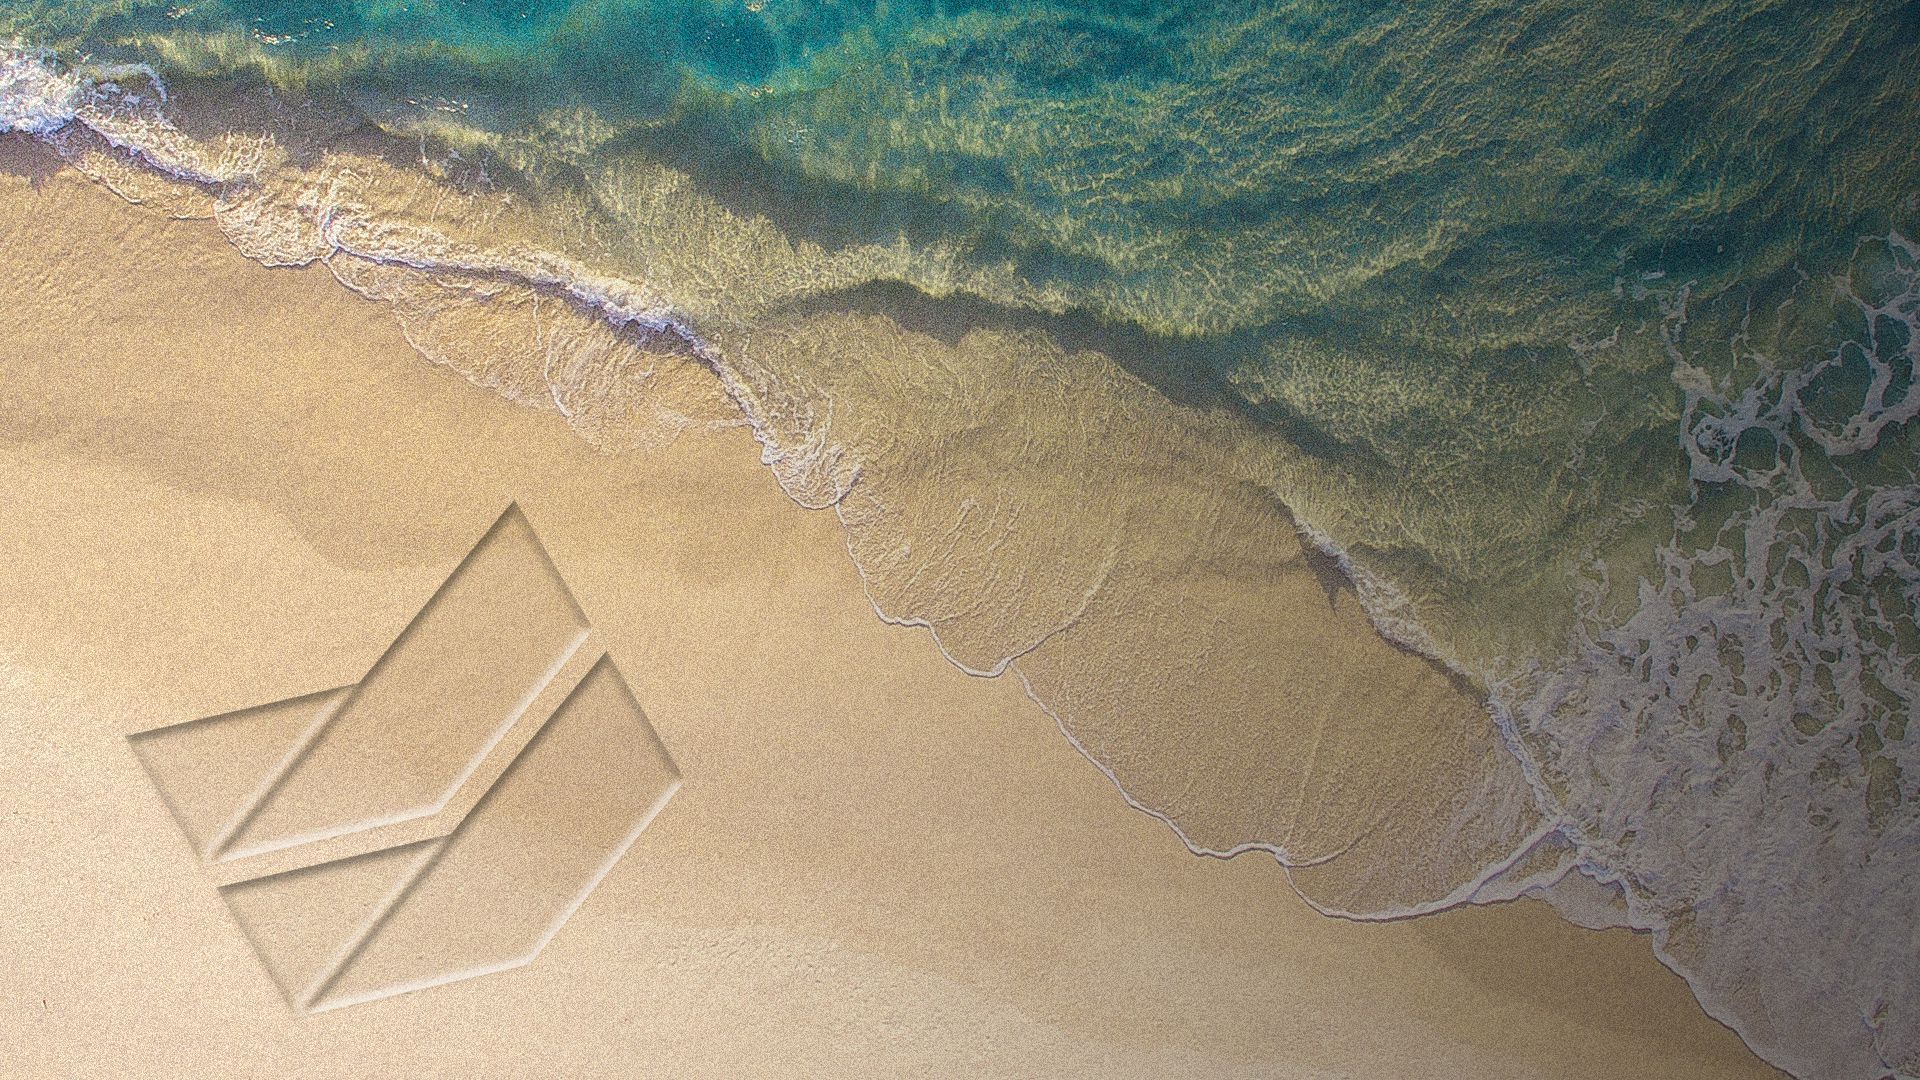 Illustration of the Chevron logo drawn in the sand.